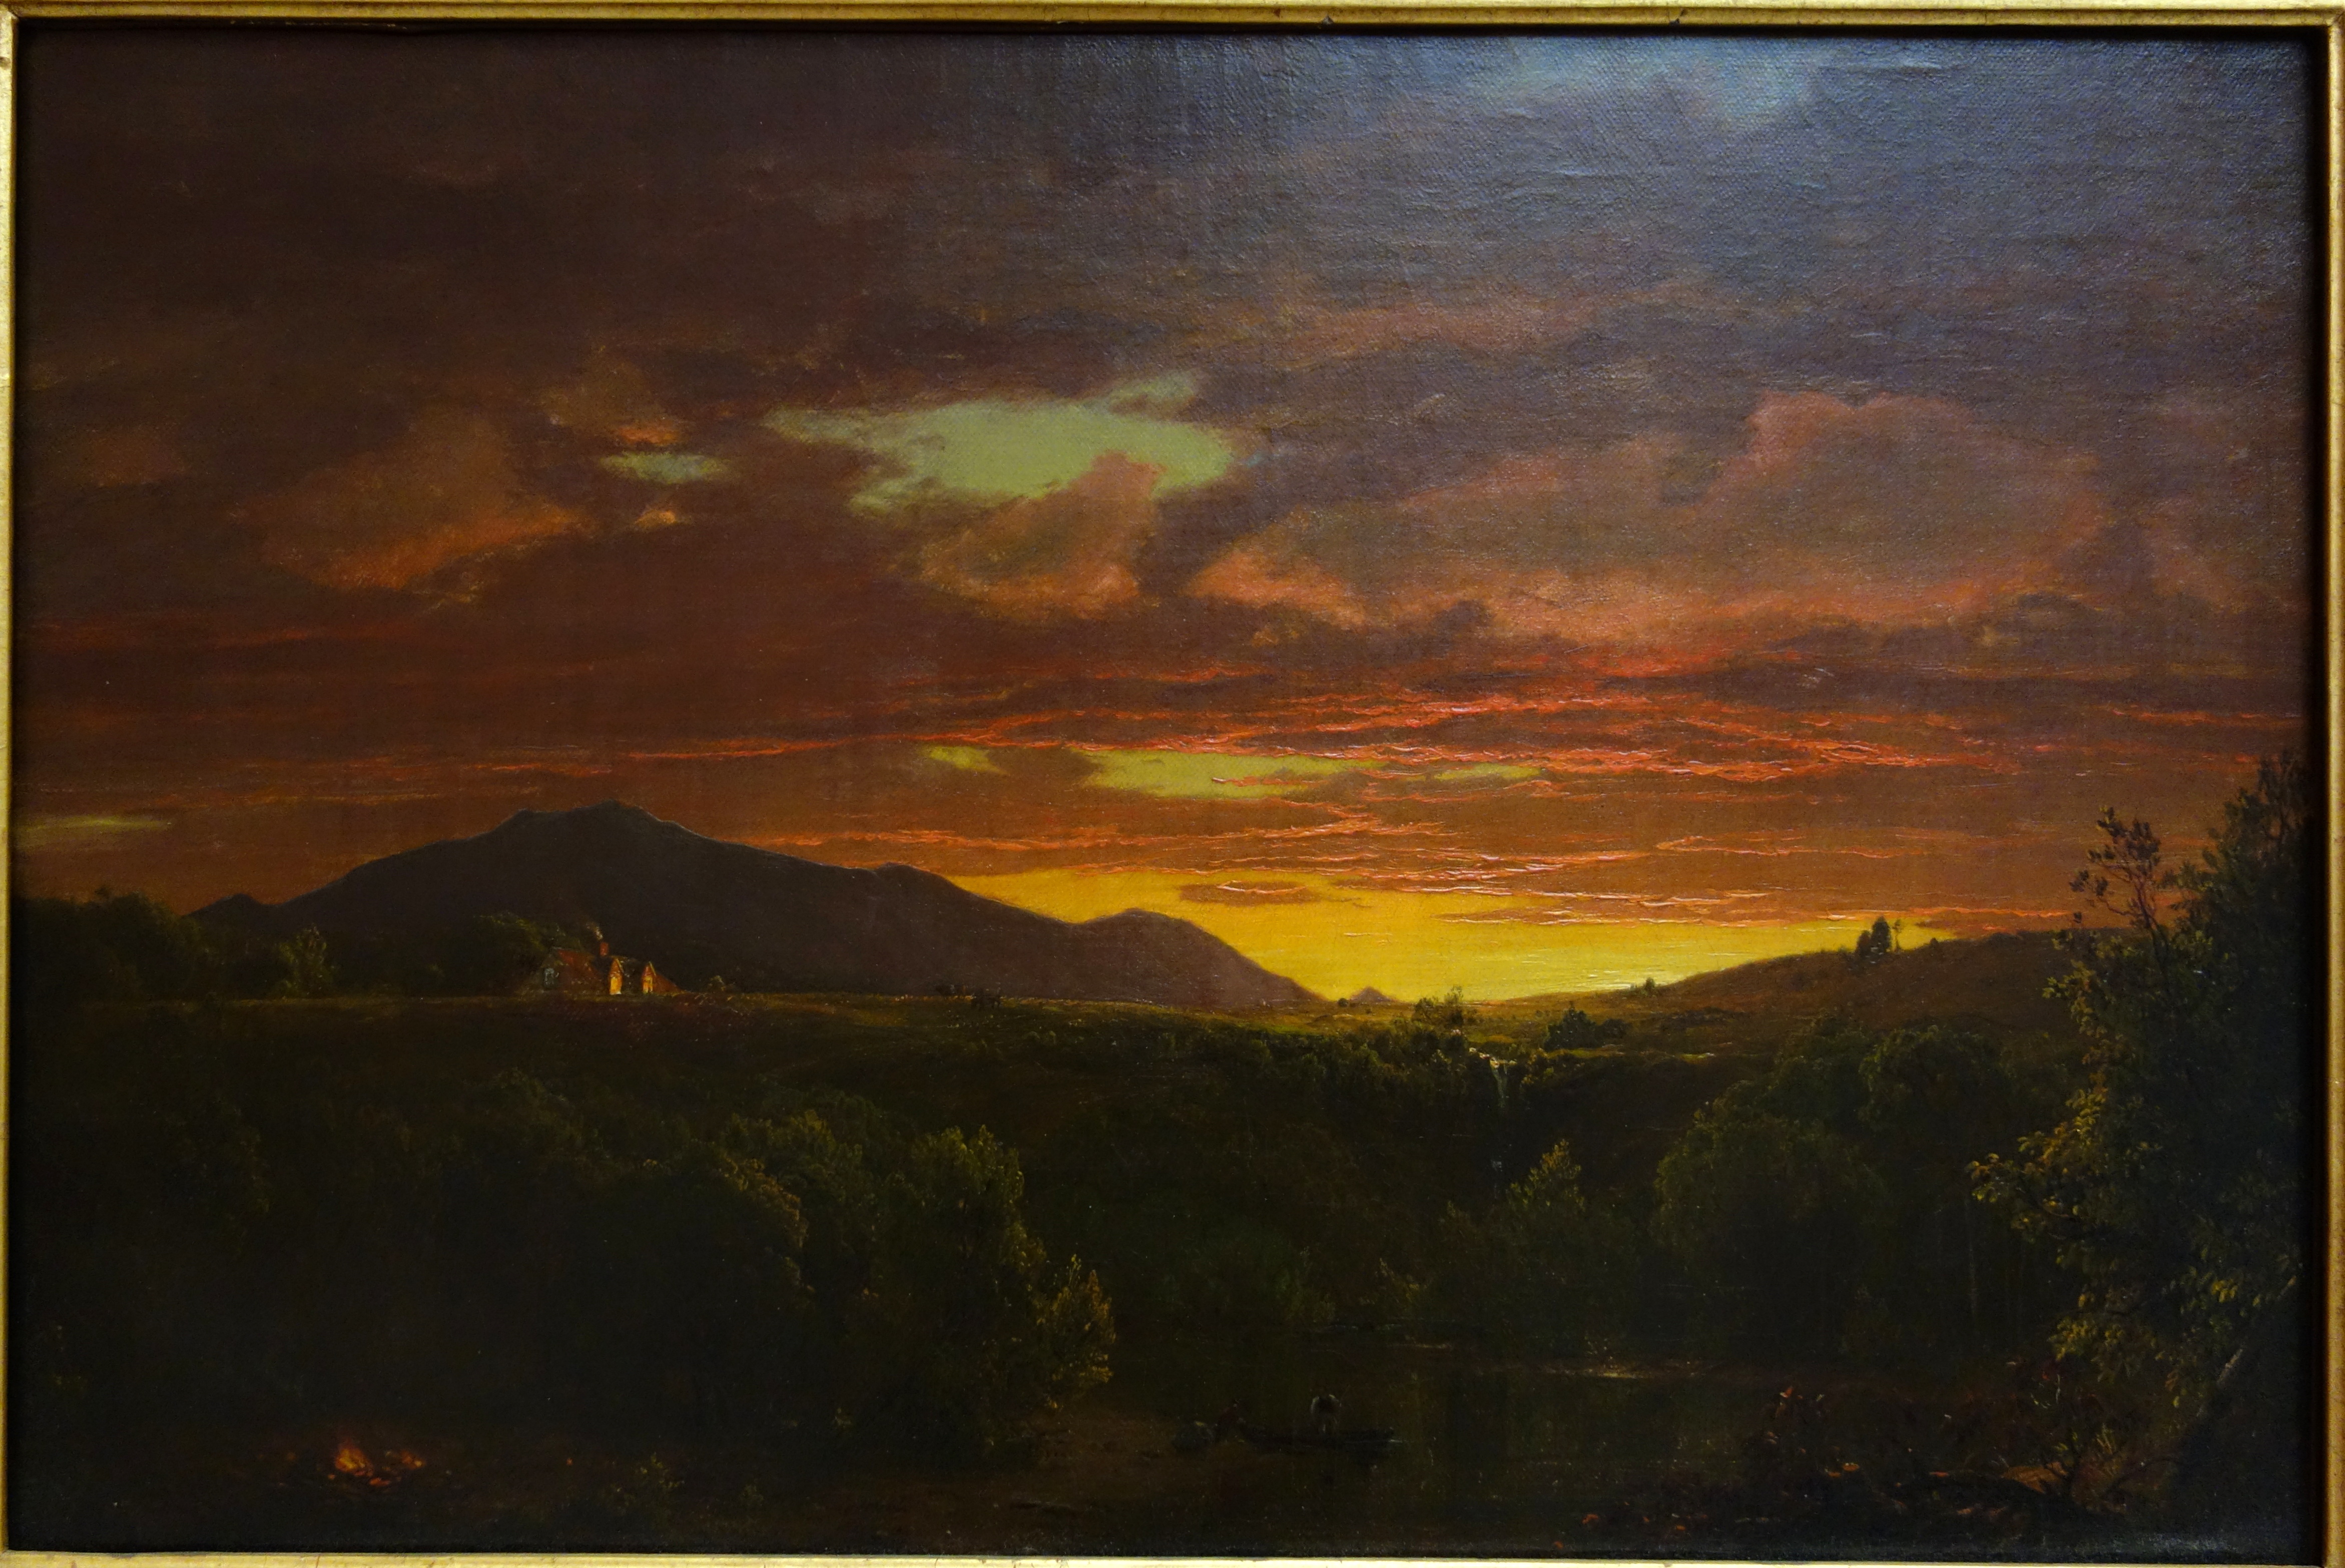 Twilight (Sunset) by Frederic E. Church, 1856, oil on canvas - Albany Institute of History and Art - DSC08132